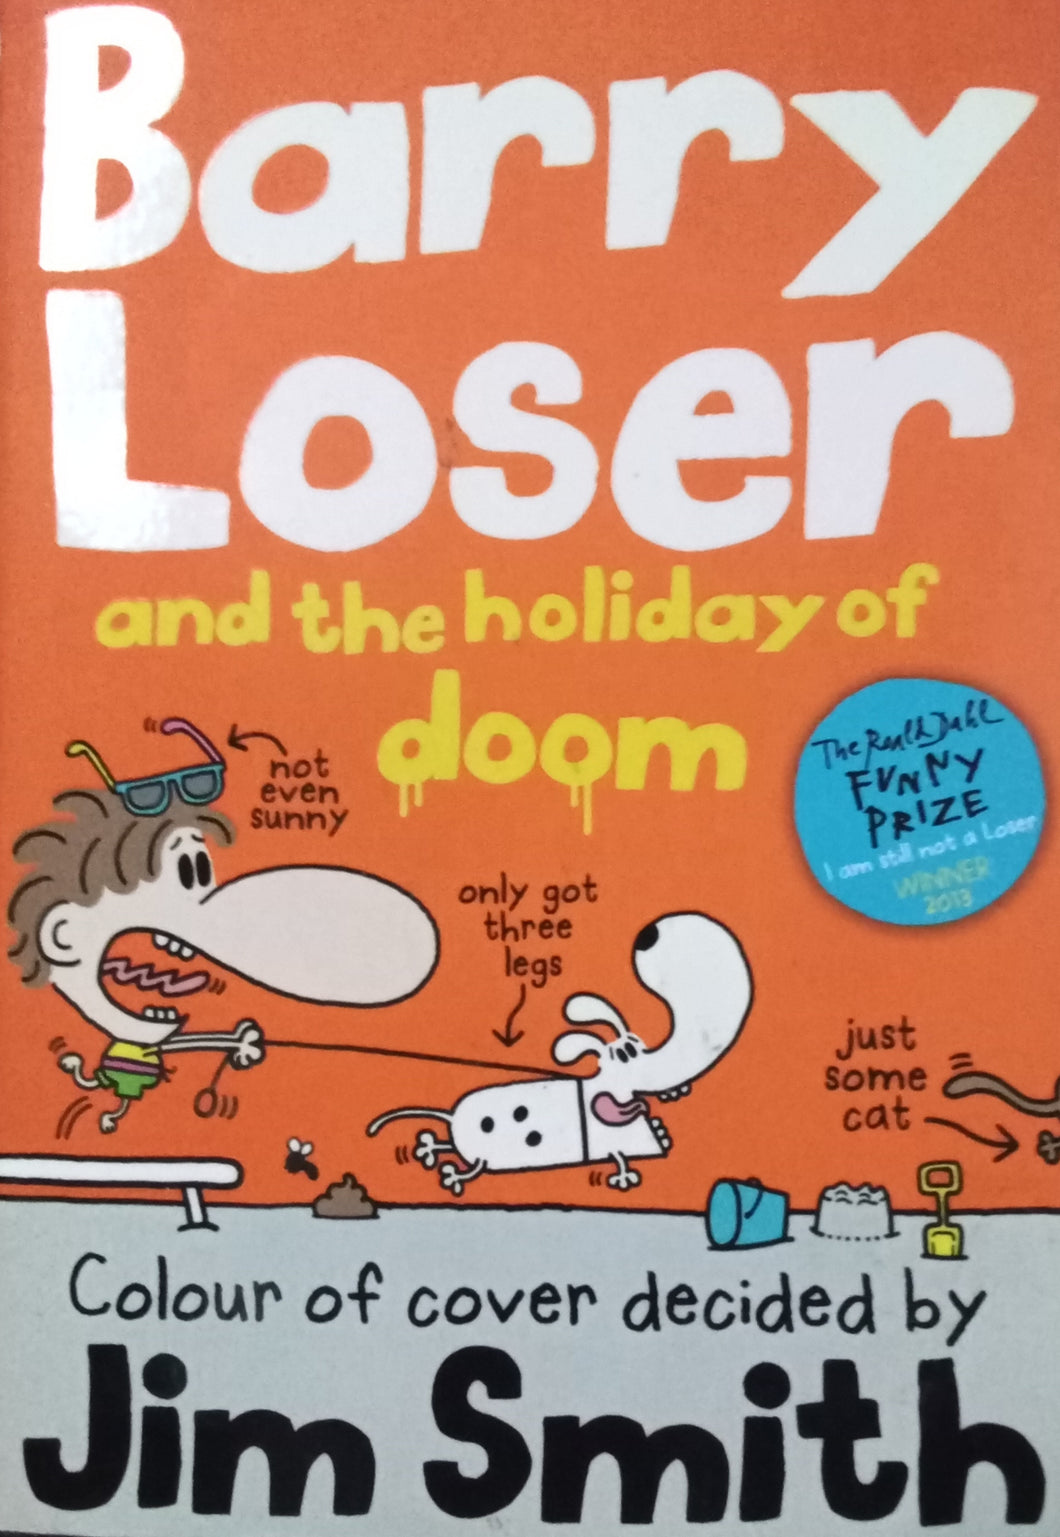 Barry Loser And The Holiday Of Doom By Jim Smith